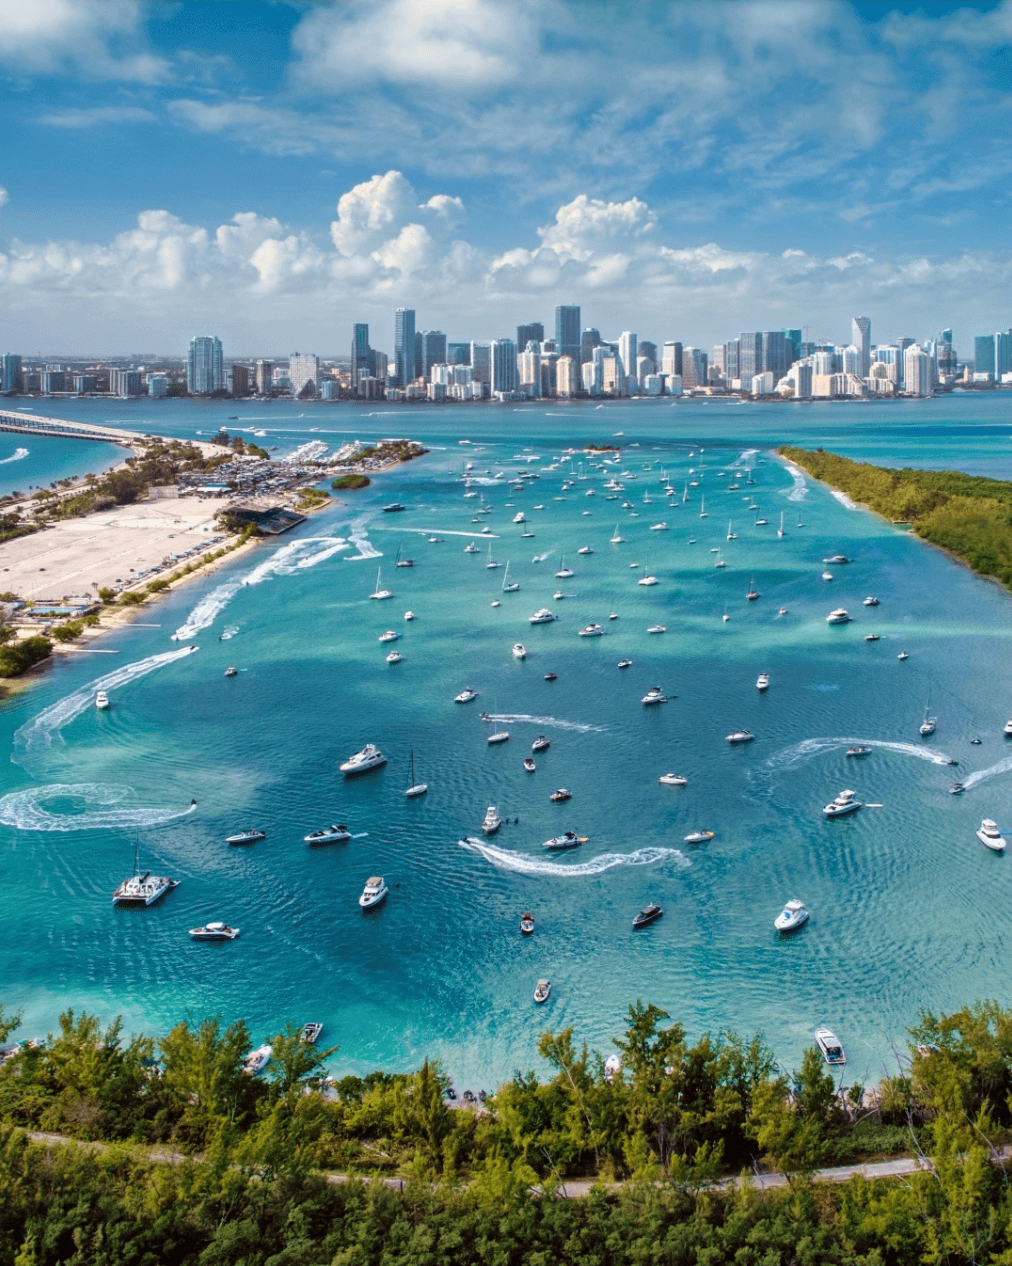 Transparent boat rental and tour prices for hassle-free Miami adventure.